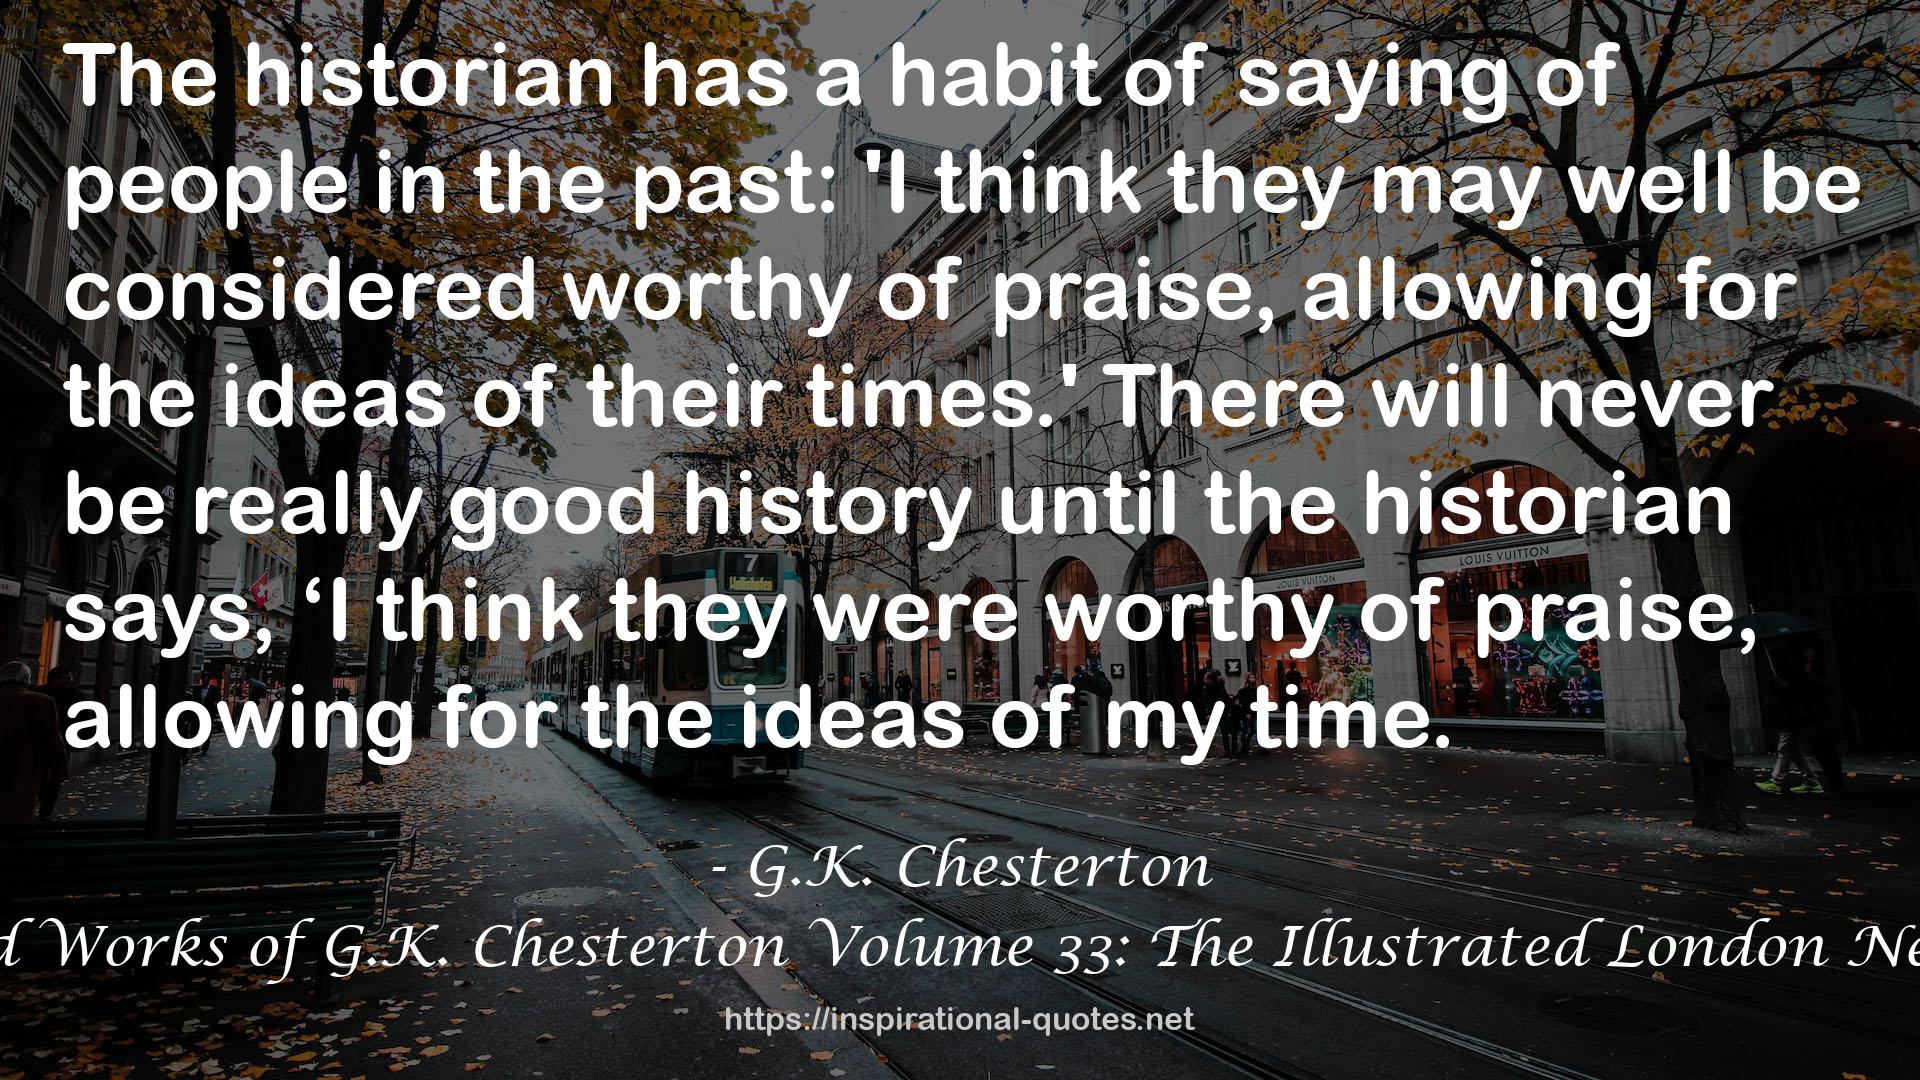 The Collected Works of G.K. Chesterton Volume 33: The Illustrated London News 1923-1925 QUOTES